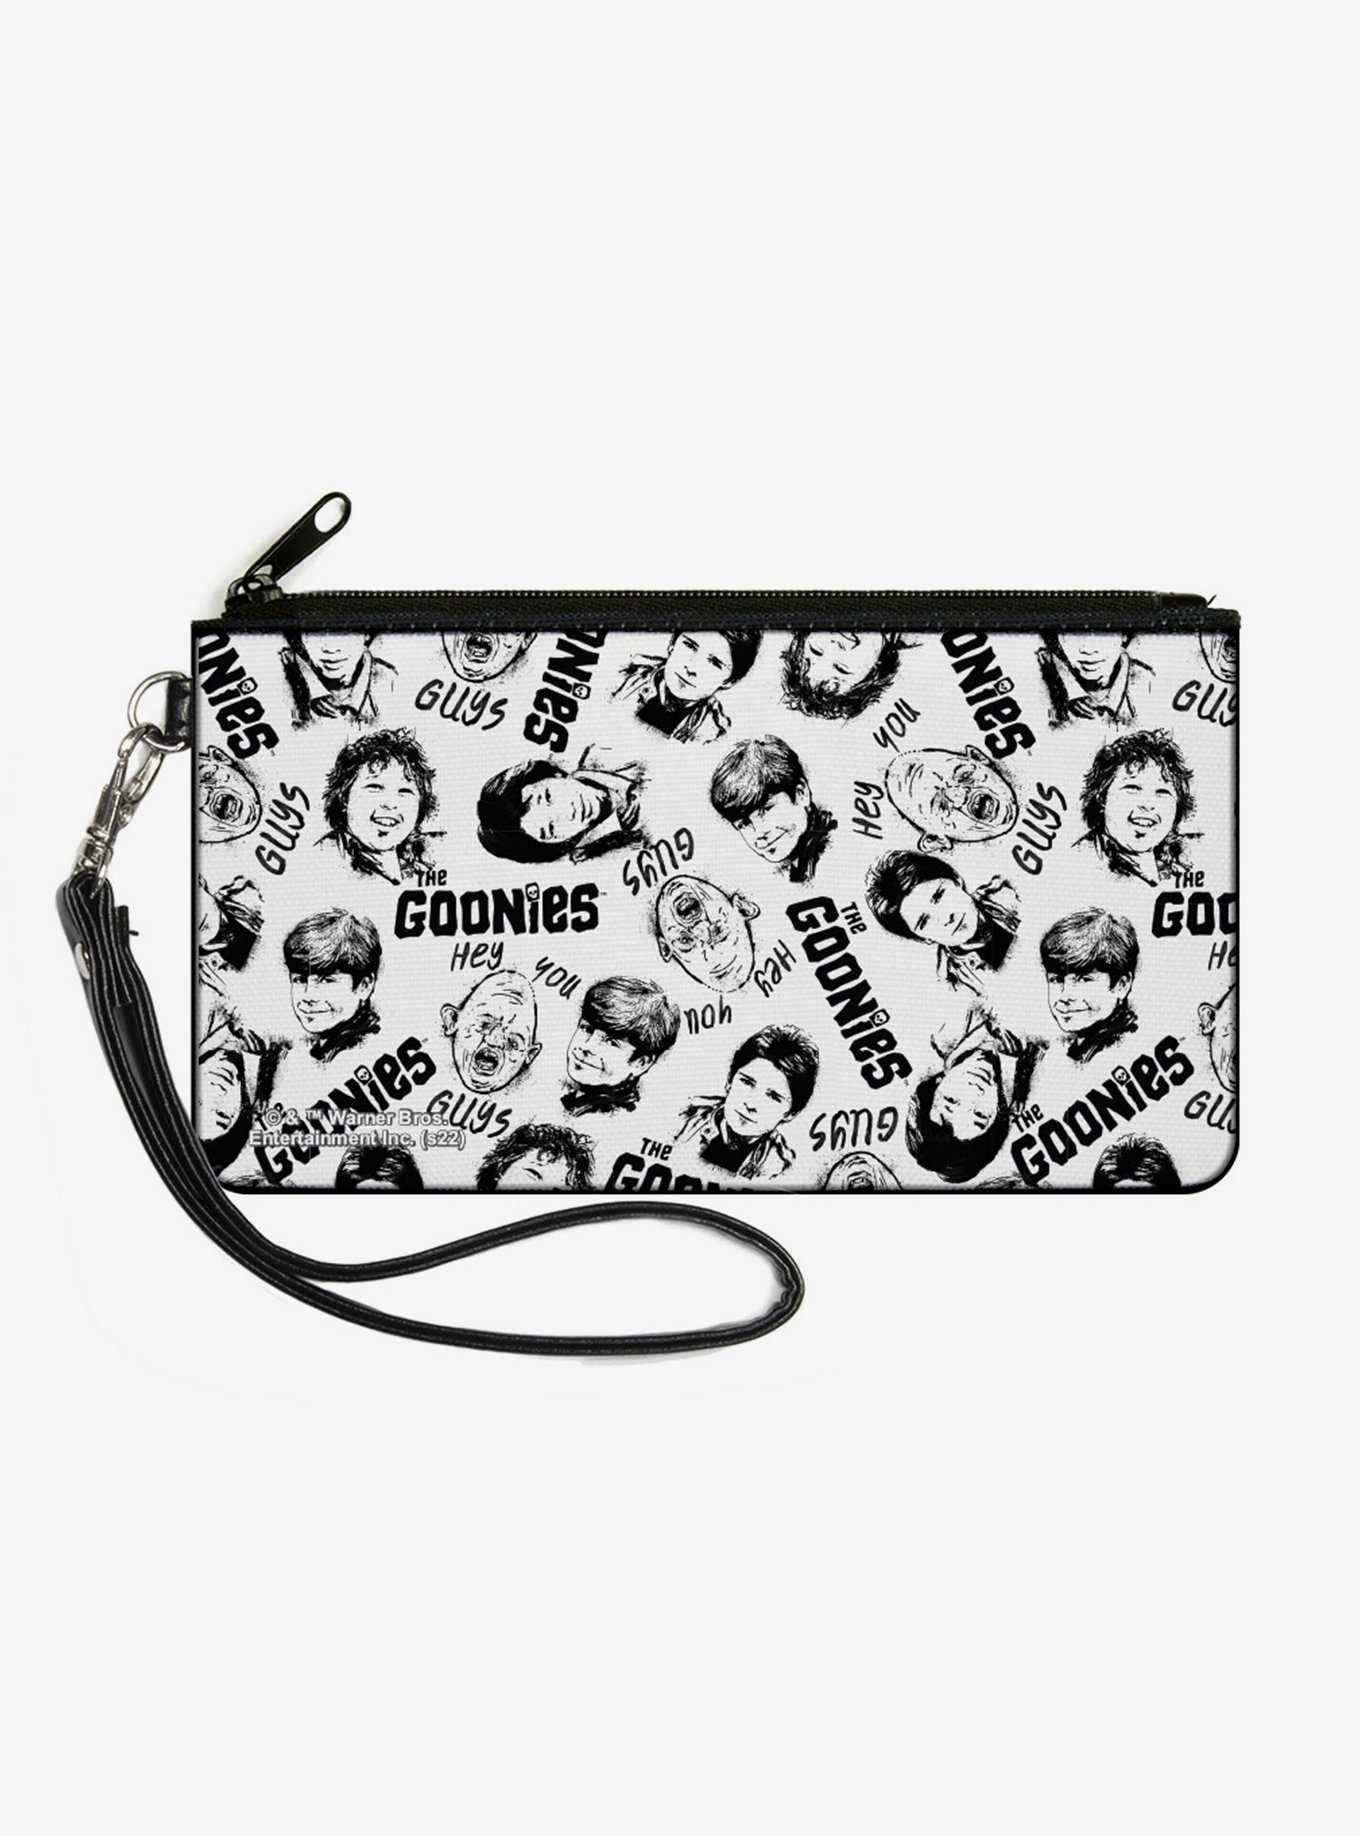 The Goonies Character Face Sketch Collage Canvas Zip Clutch Wallet, , hi-res